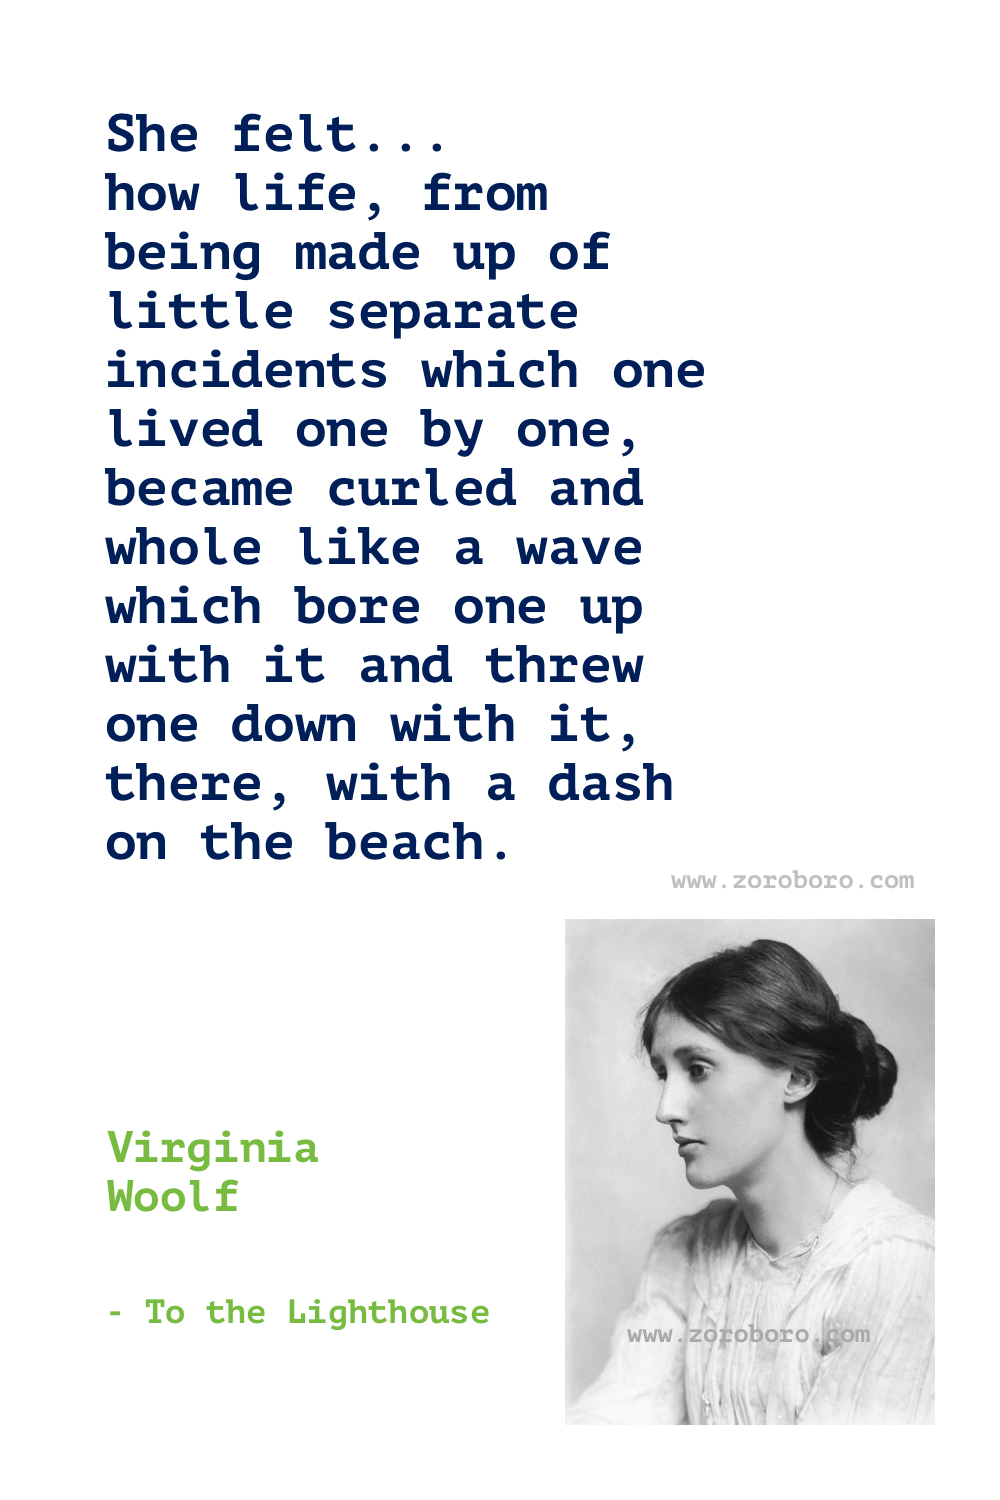 Virginia Woolf Quotes, Virginia Woolf Books Quotes, Mrs Dalloway, A Room of One's Own, To the Lighthouse & Orlando Quotes, Virginia Woolf Poems, Virginia Woolf Feminism Quotes, Women Quotes.Virginia Woolf Feminist Quotes.